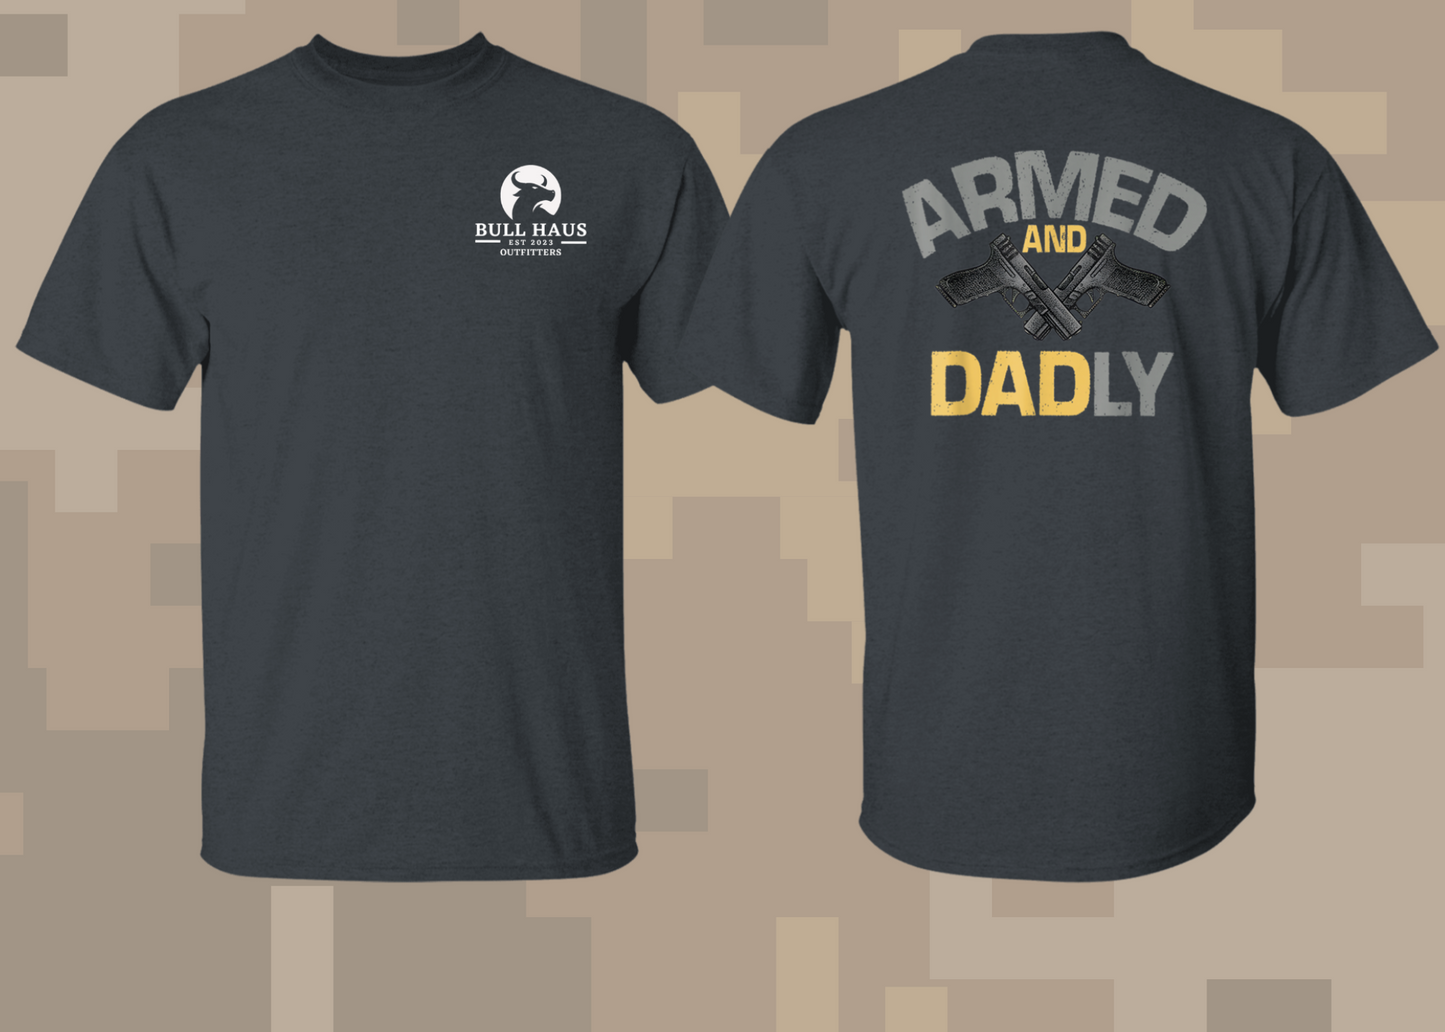 Armed and Dadly Shirt